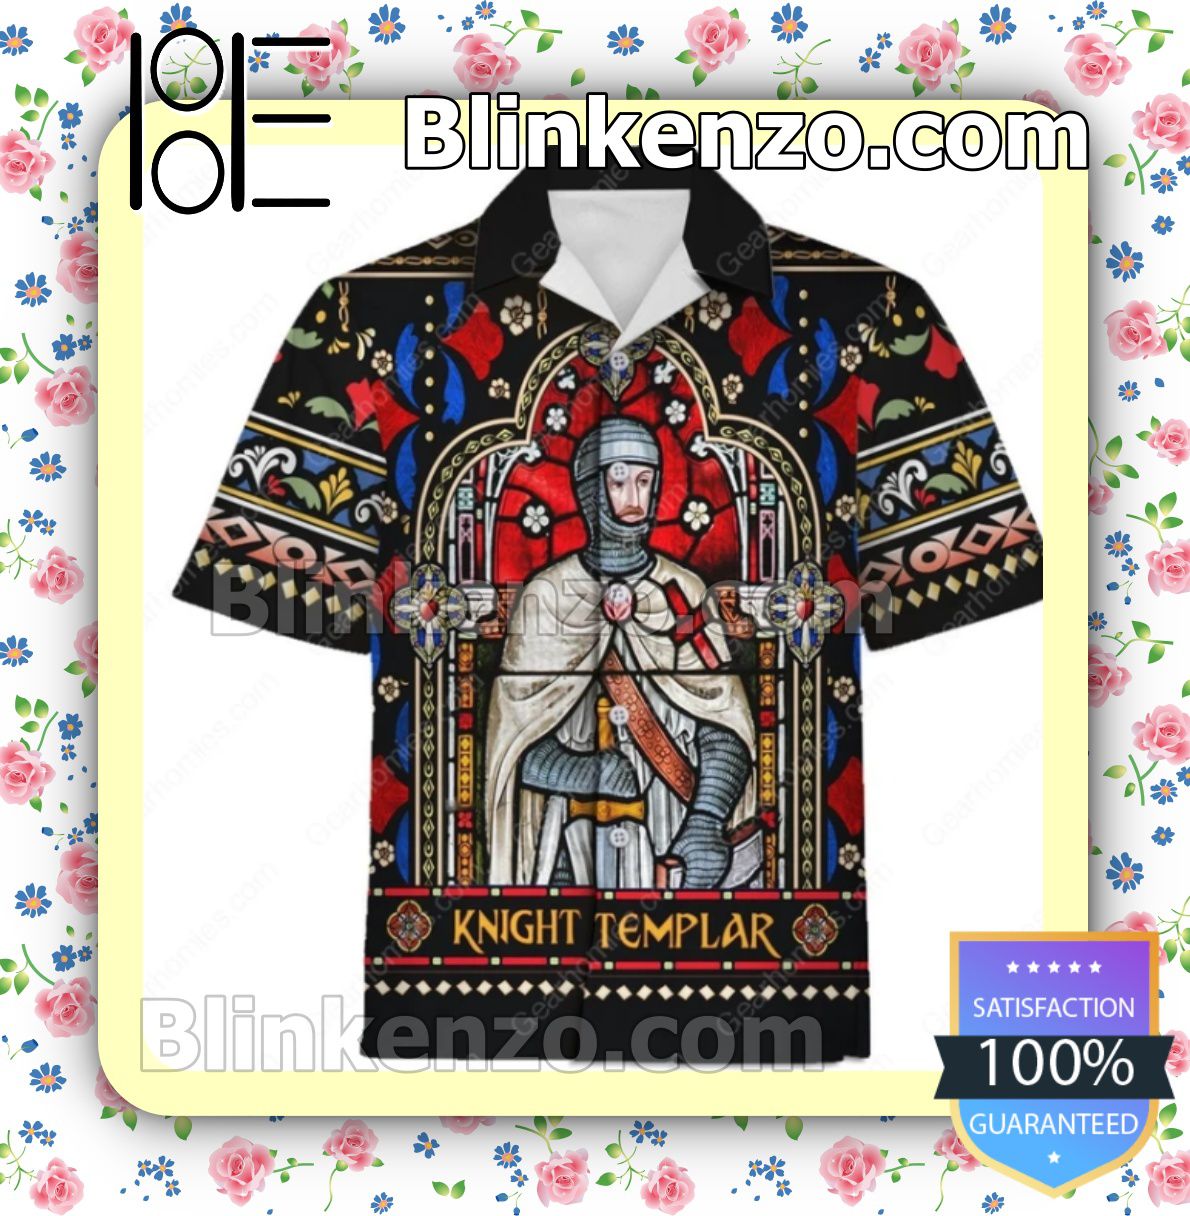 Knight Templar Stained Glass Summer Shirts